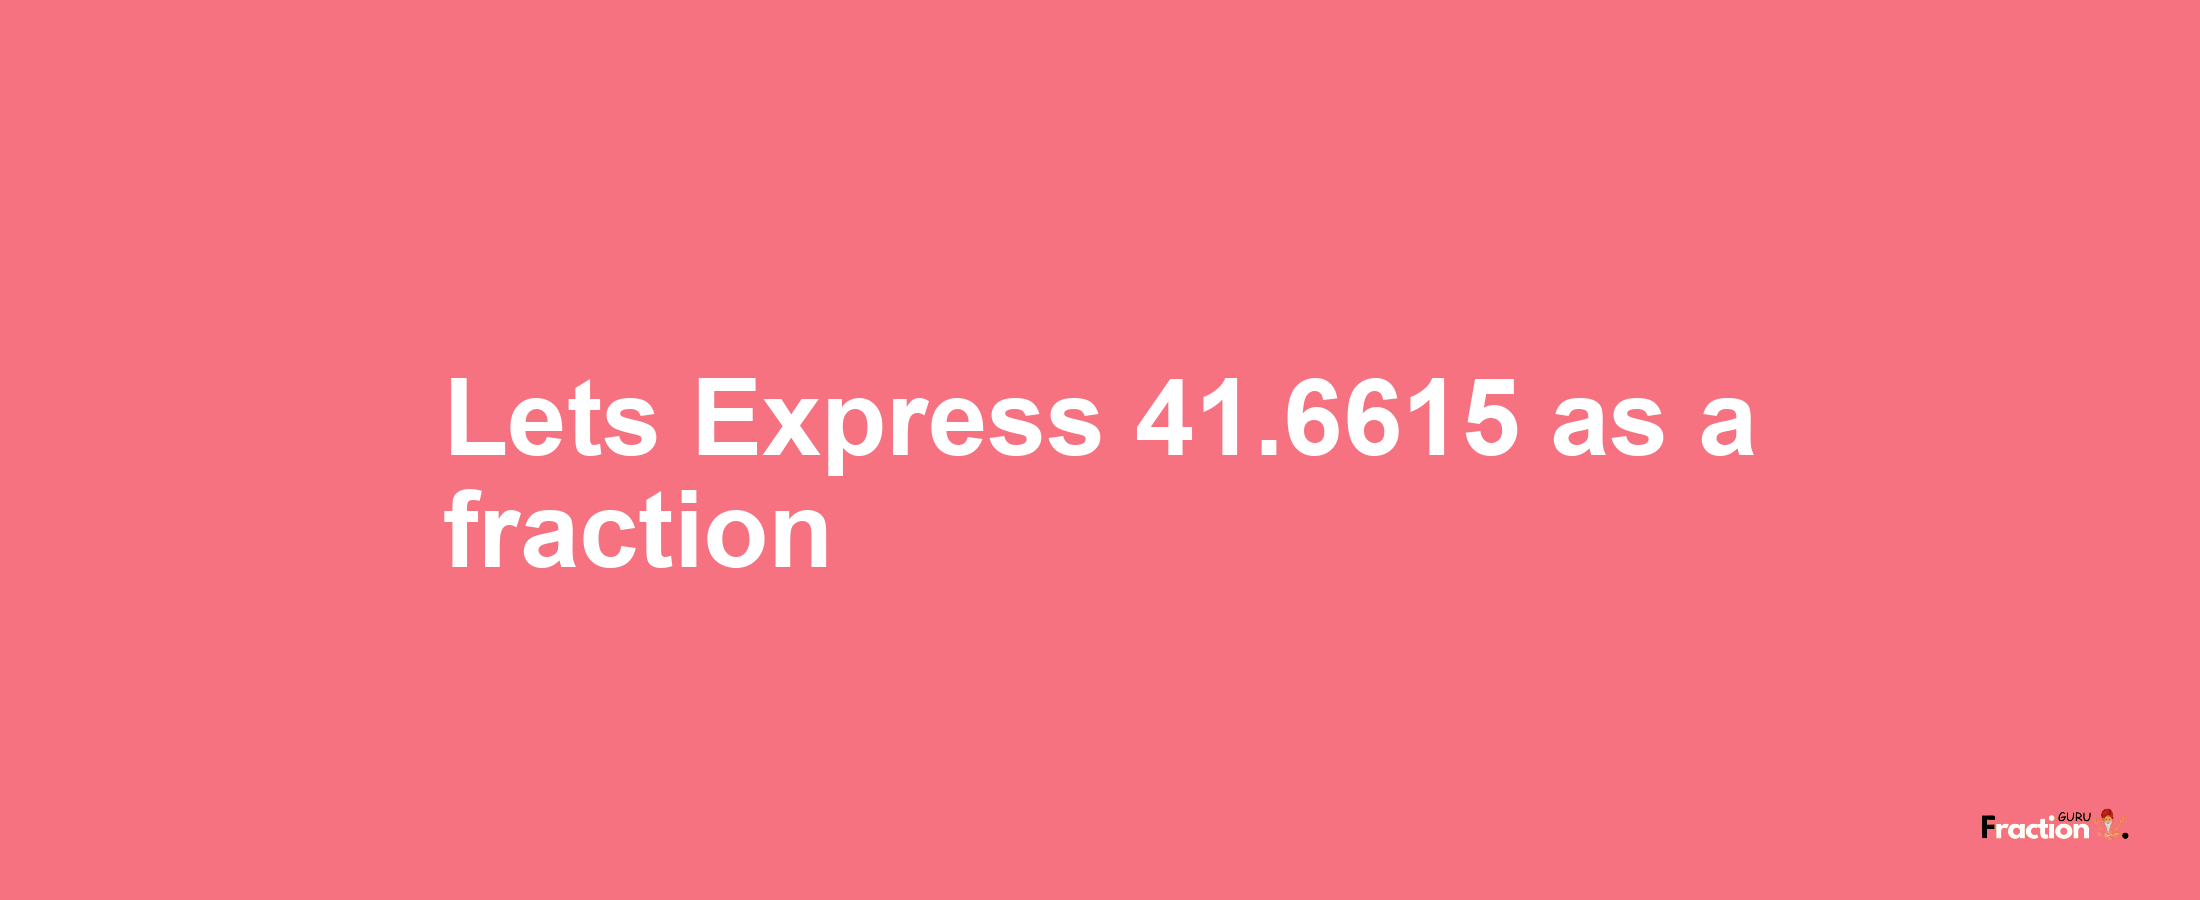 Lets Express 41.6615 as afraction